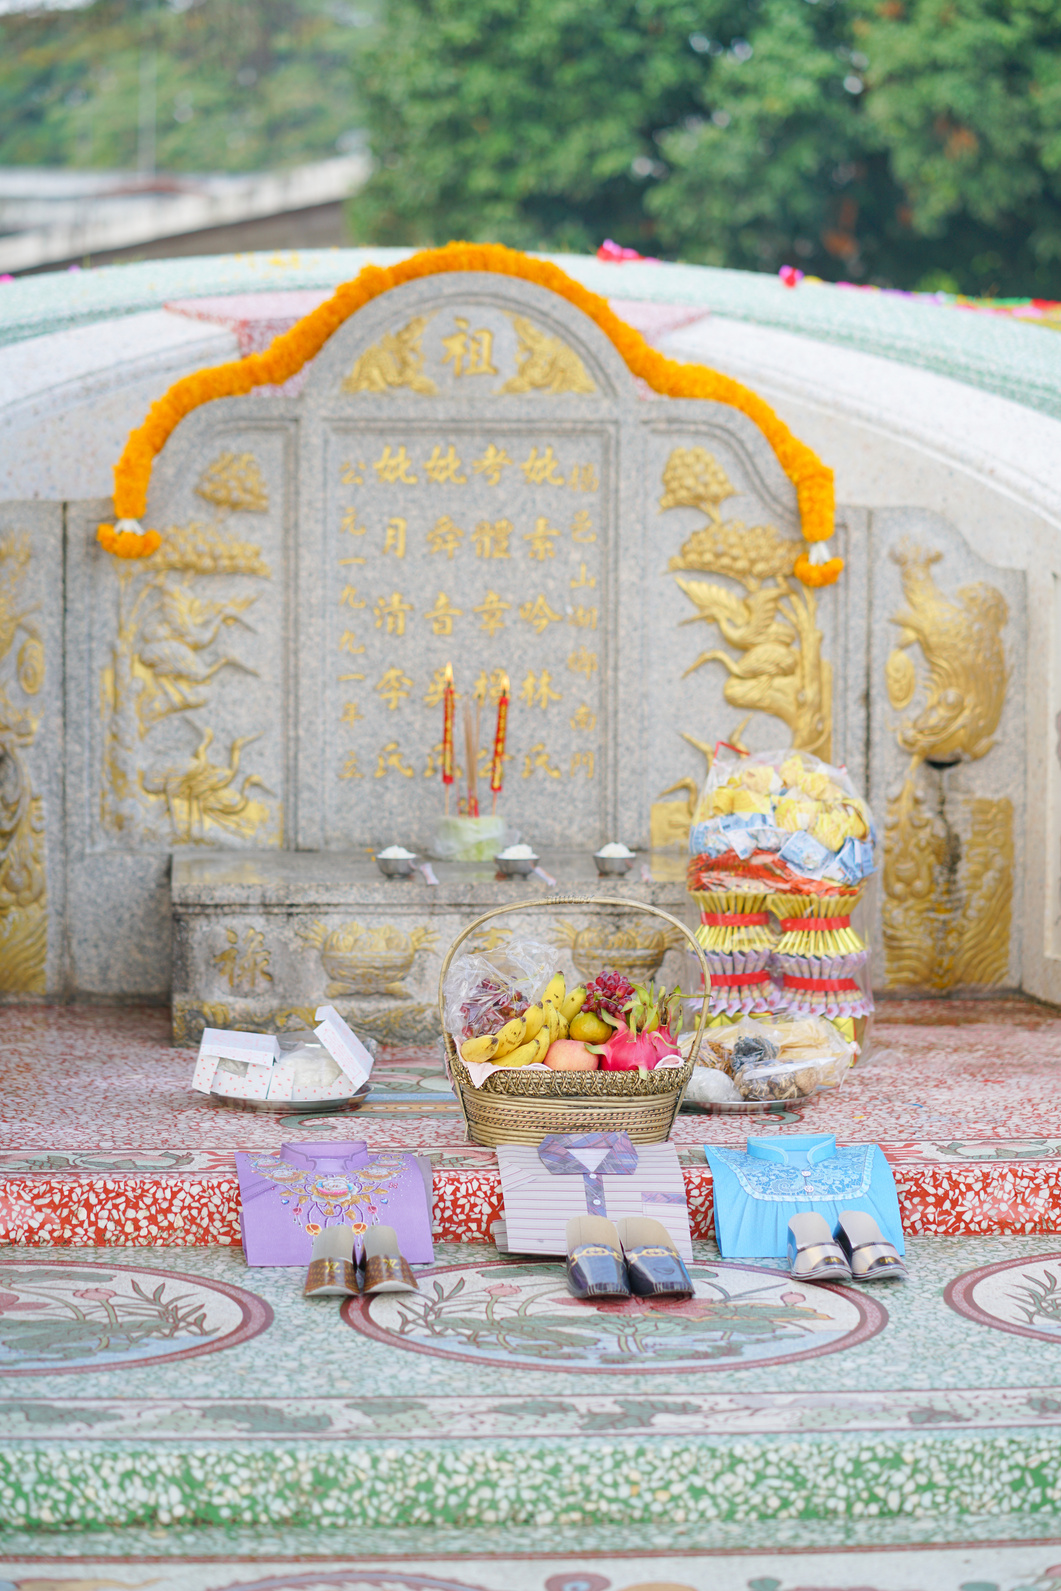 Qing Ming or Tomb sweeping festival